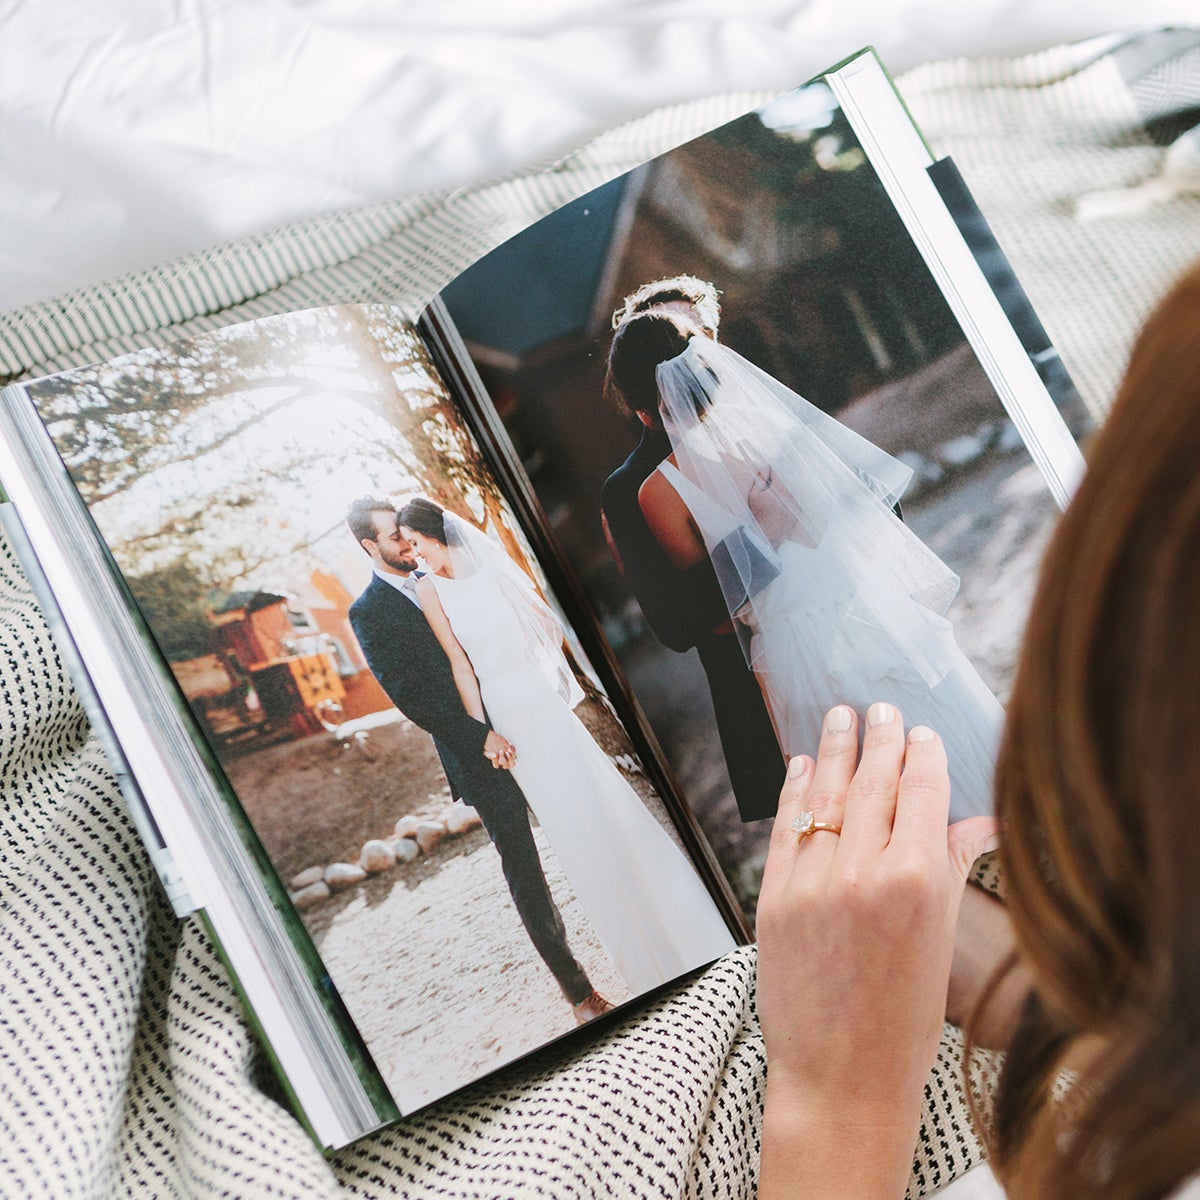 Woman flipping through interior pages of hardcover wedding photo book